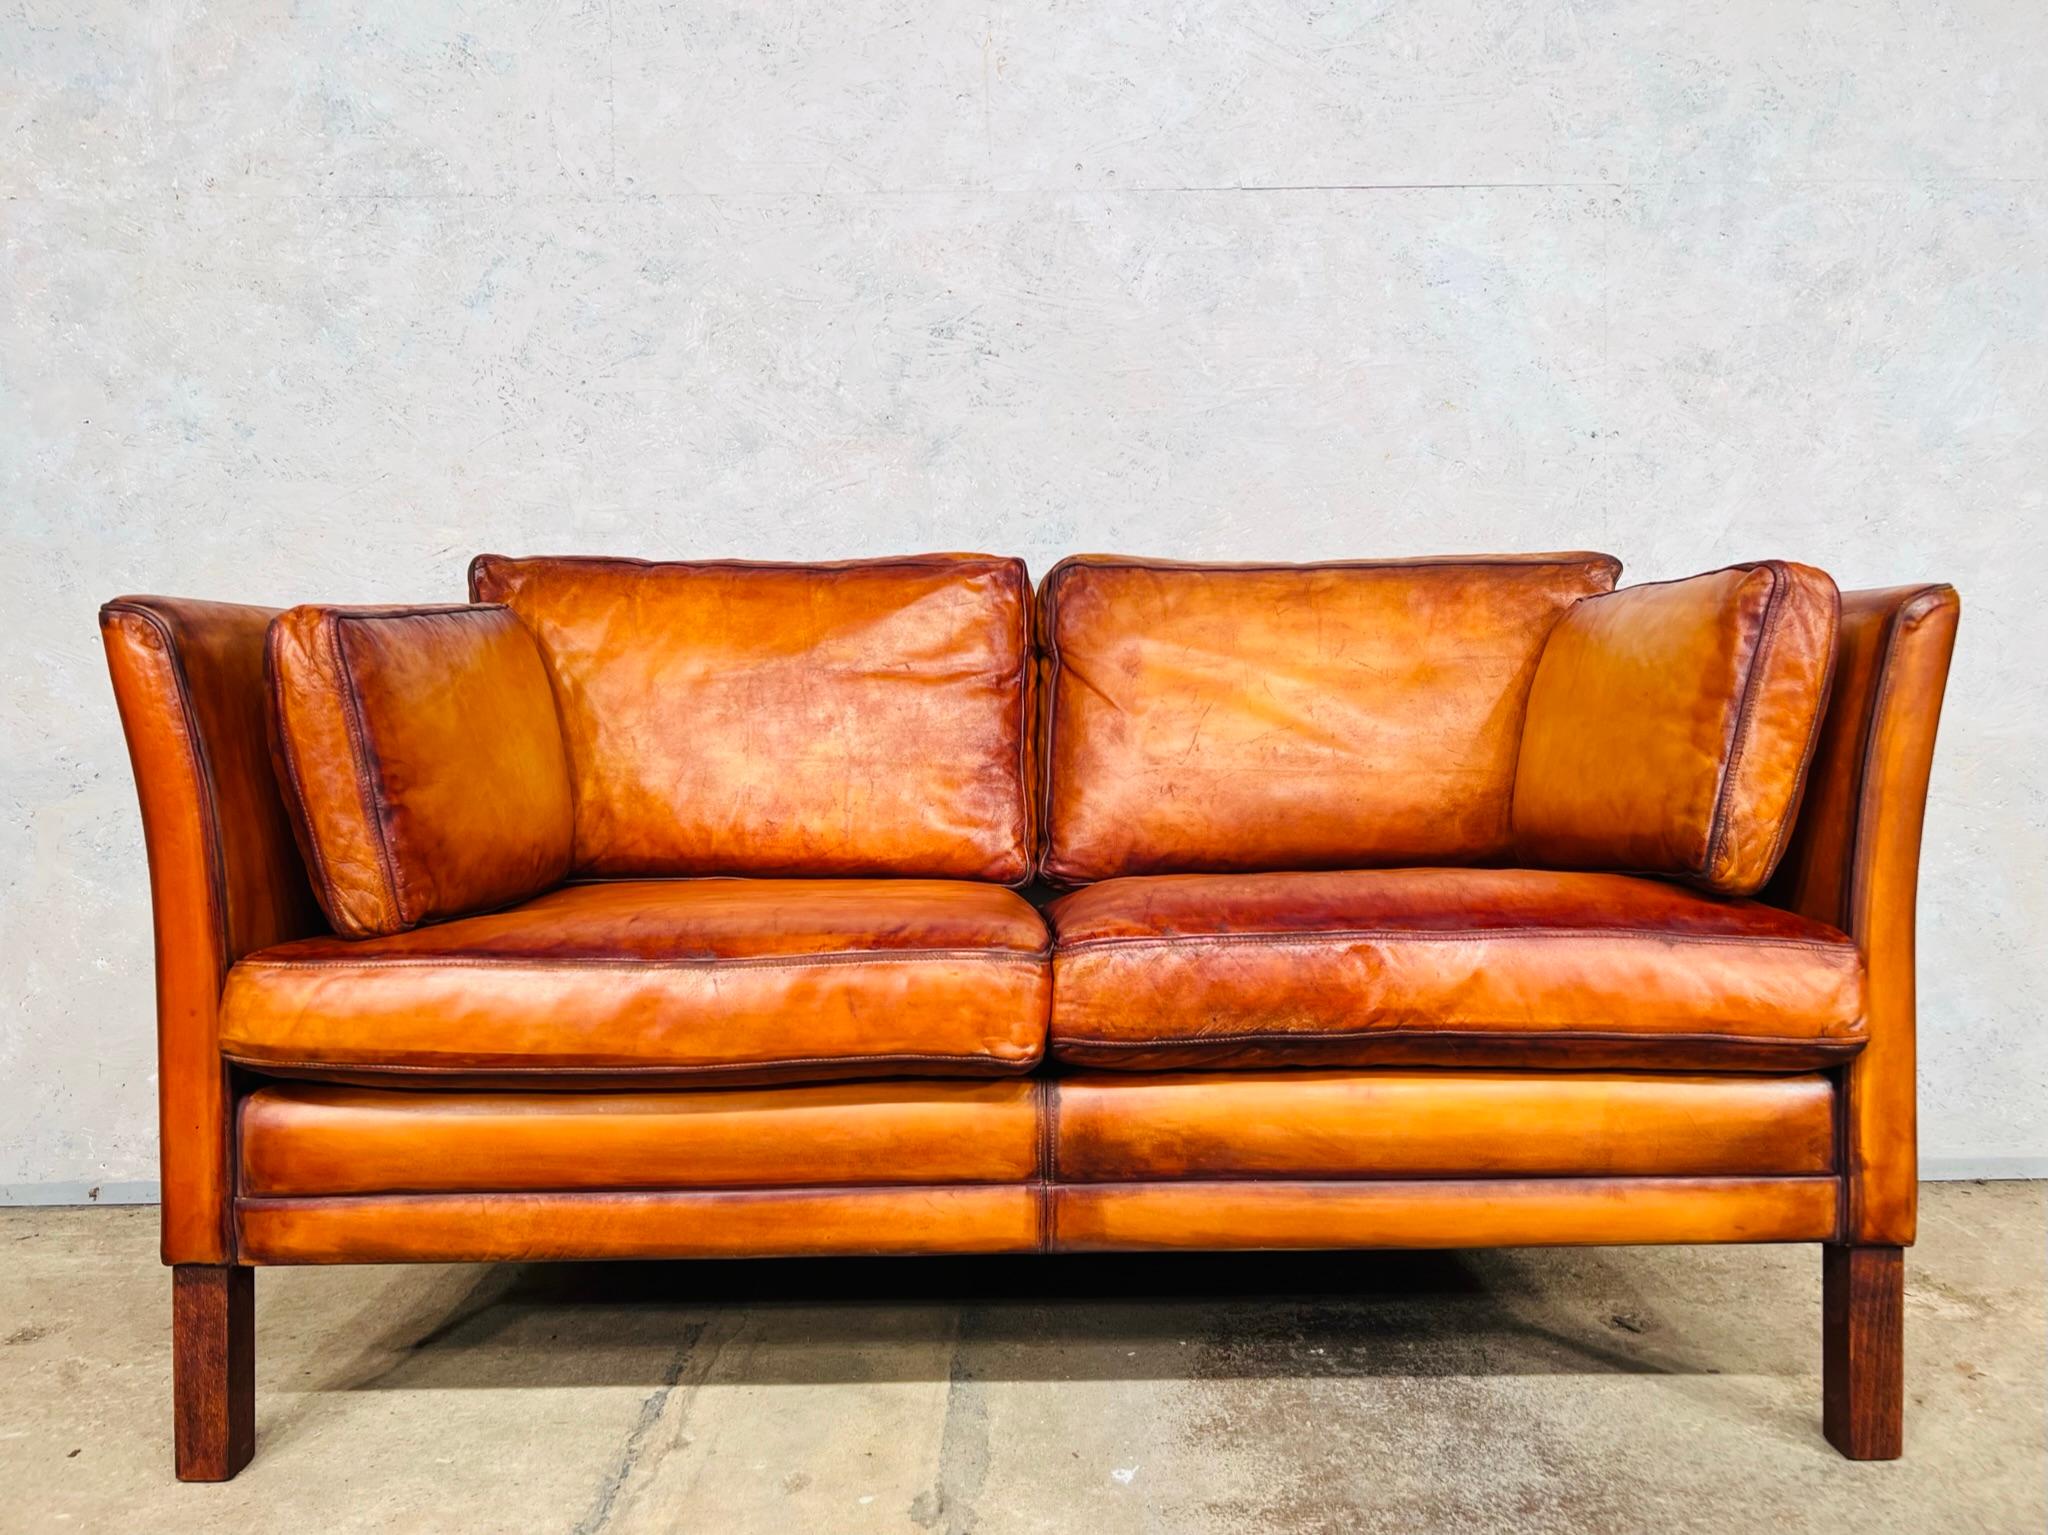 A stylish matching two seater and three seater Danish 1970s sofas designed by Mogens Hansen, great design with beautiful lines, they sit wonderfully together.

The leather has a stunning hand dyed light tan colour with great patina and